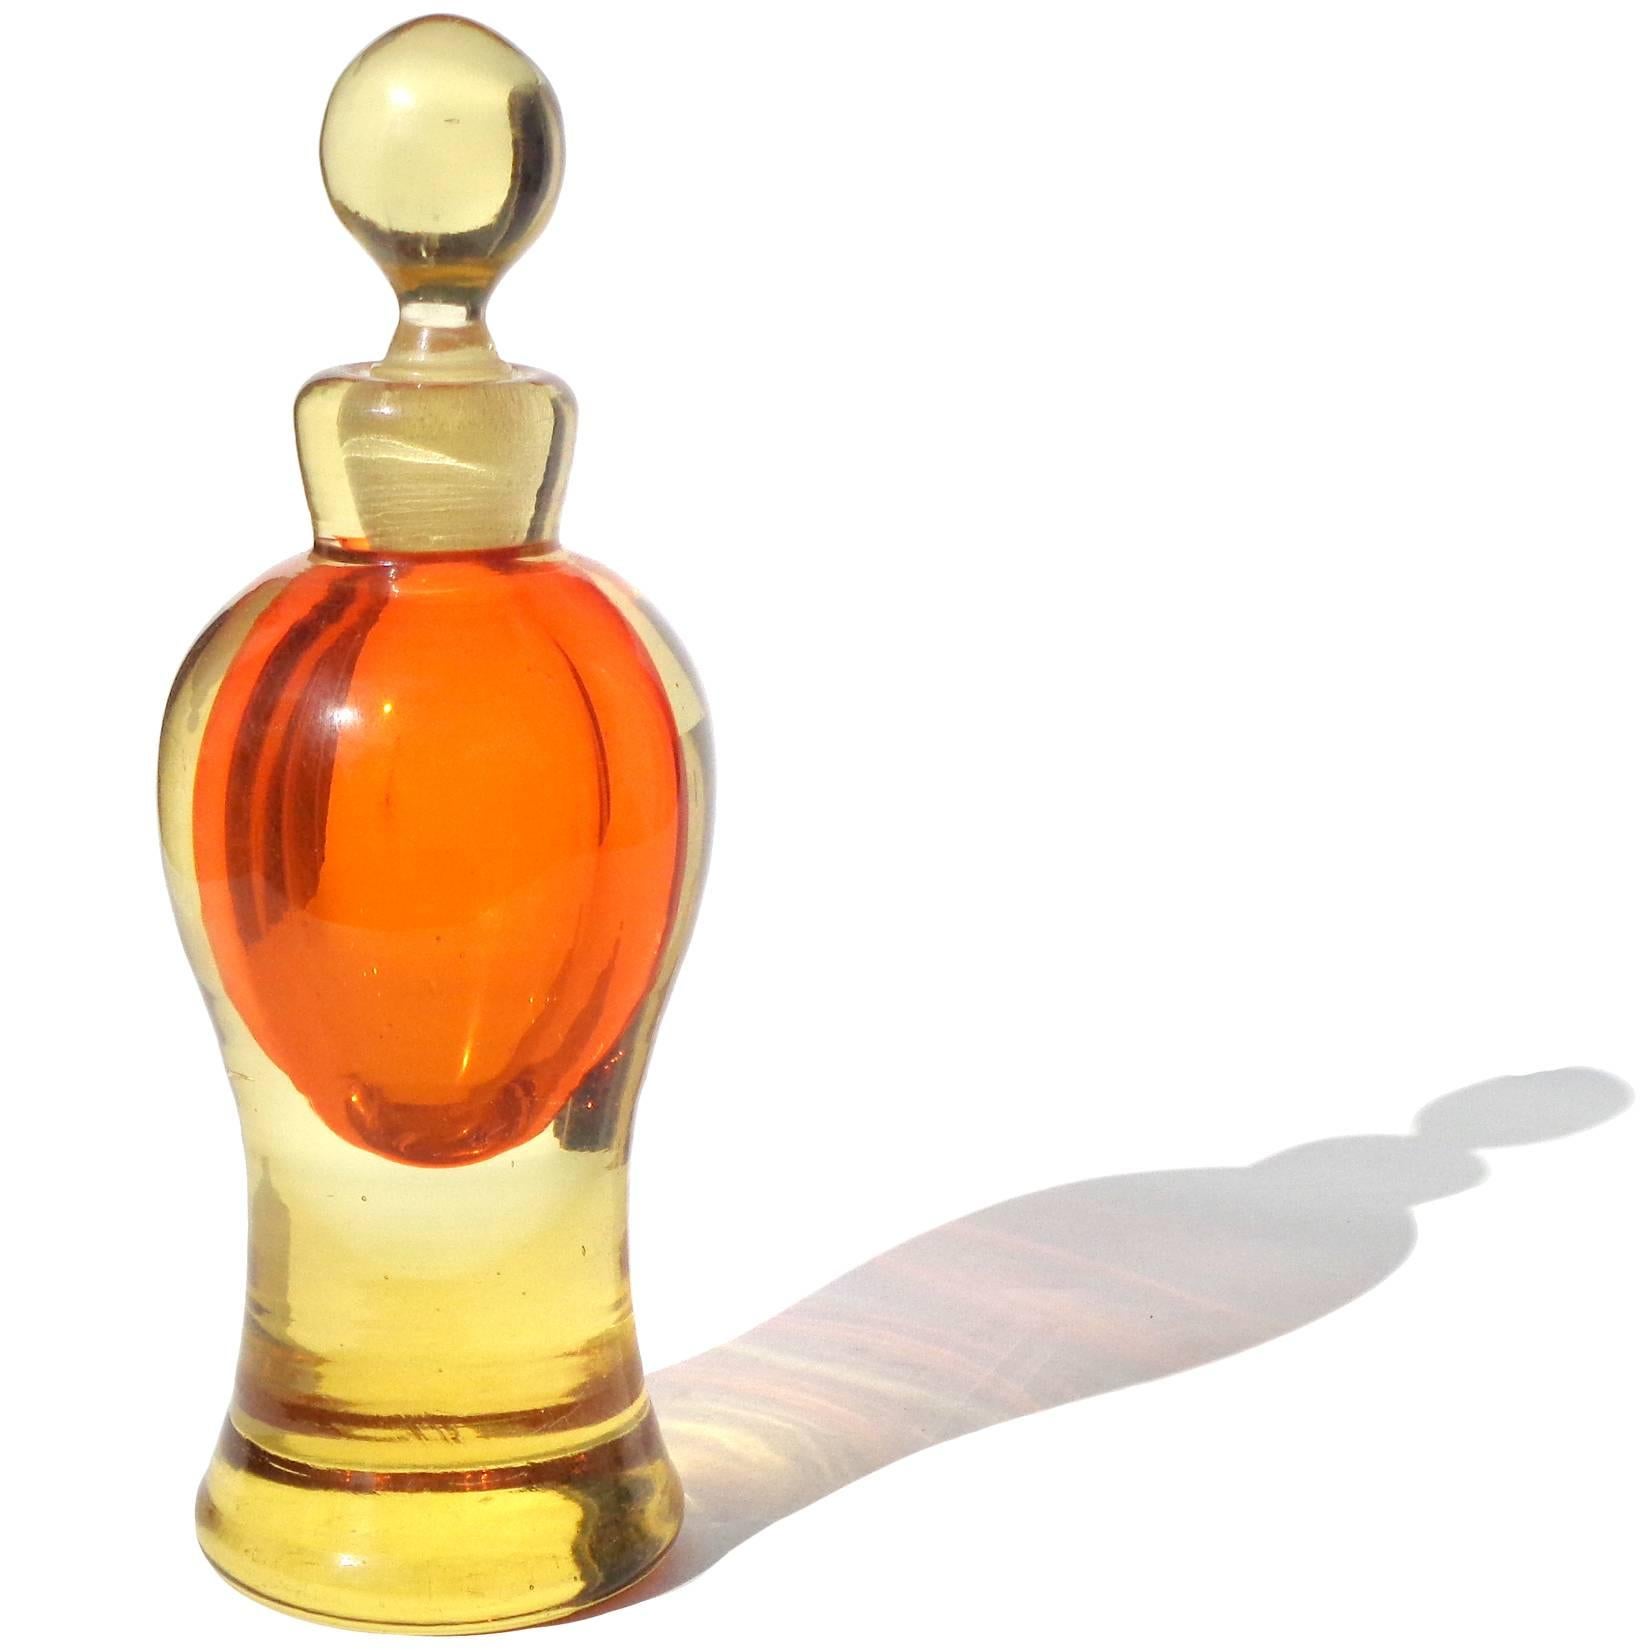 Free shipping worldwide! See details below description.

Beautiful Murano hand blown Sommerso golden yellow over bright orange art glass perfume bottle. Attributed to the Seguso Vetri d'Arte company. Measures 6 1/4